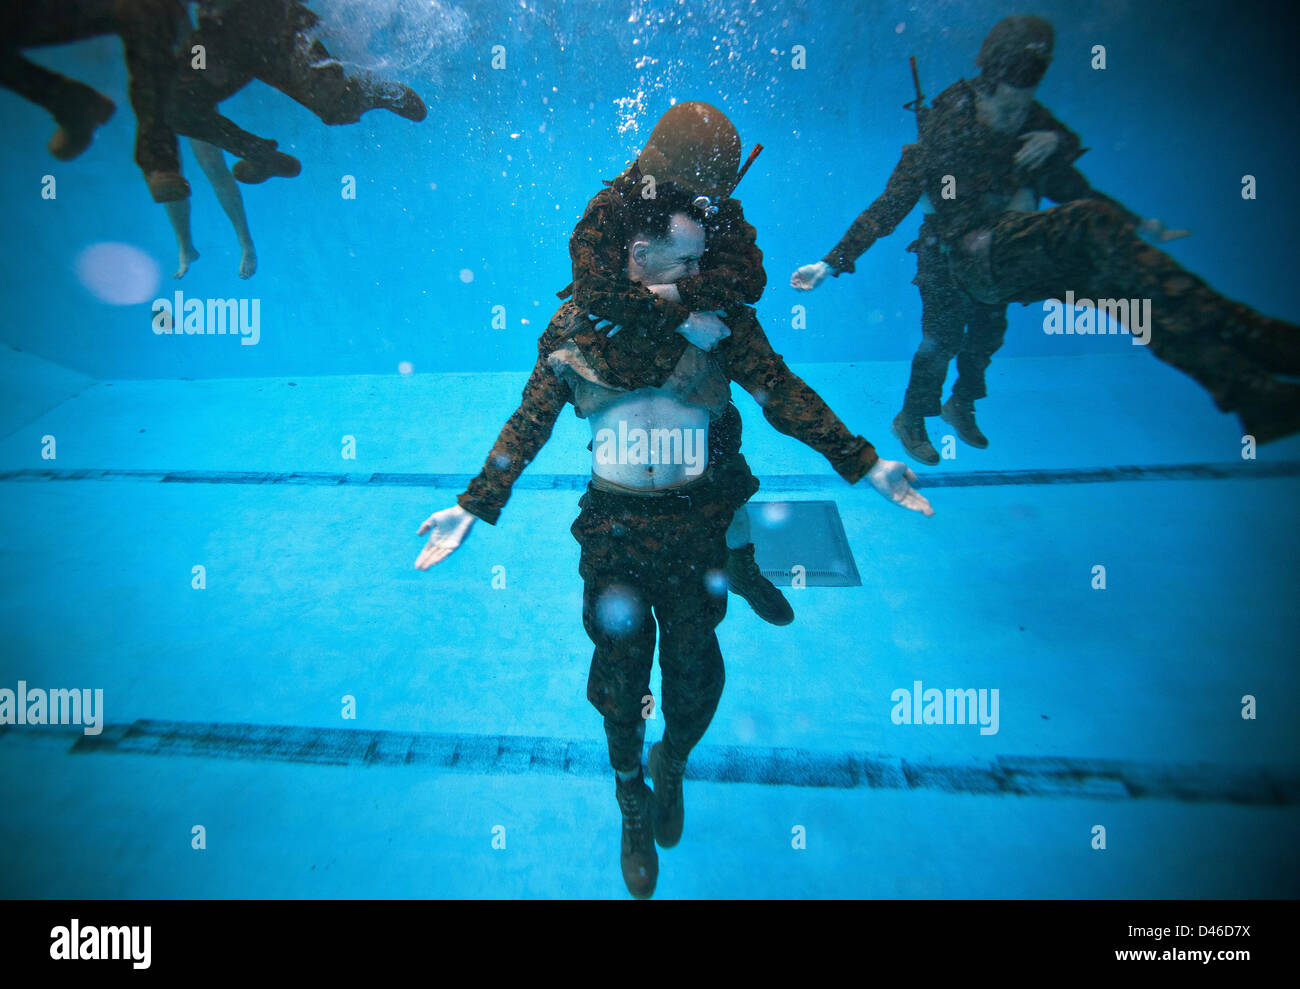 A US Marine is safely recovered underwater as part of a rescue drill during Marine Corps Swim Instructor Course March 5, 2013 at Marine Corps Base Camp Lejeune, NC. Stock Photo